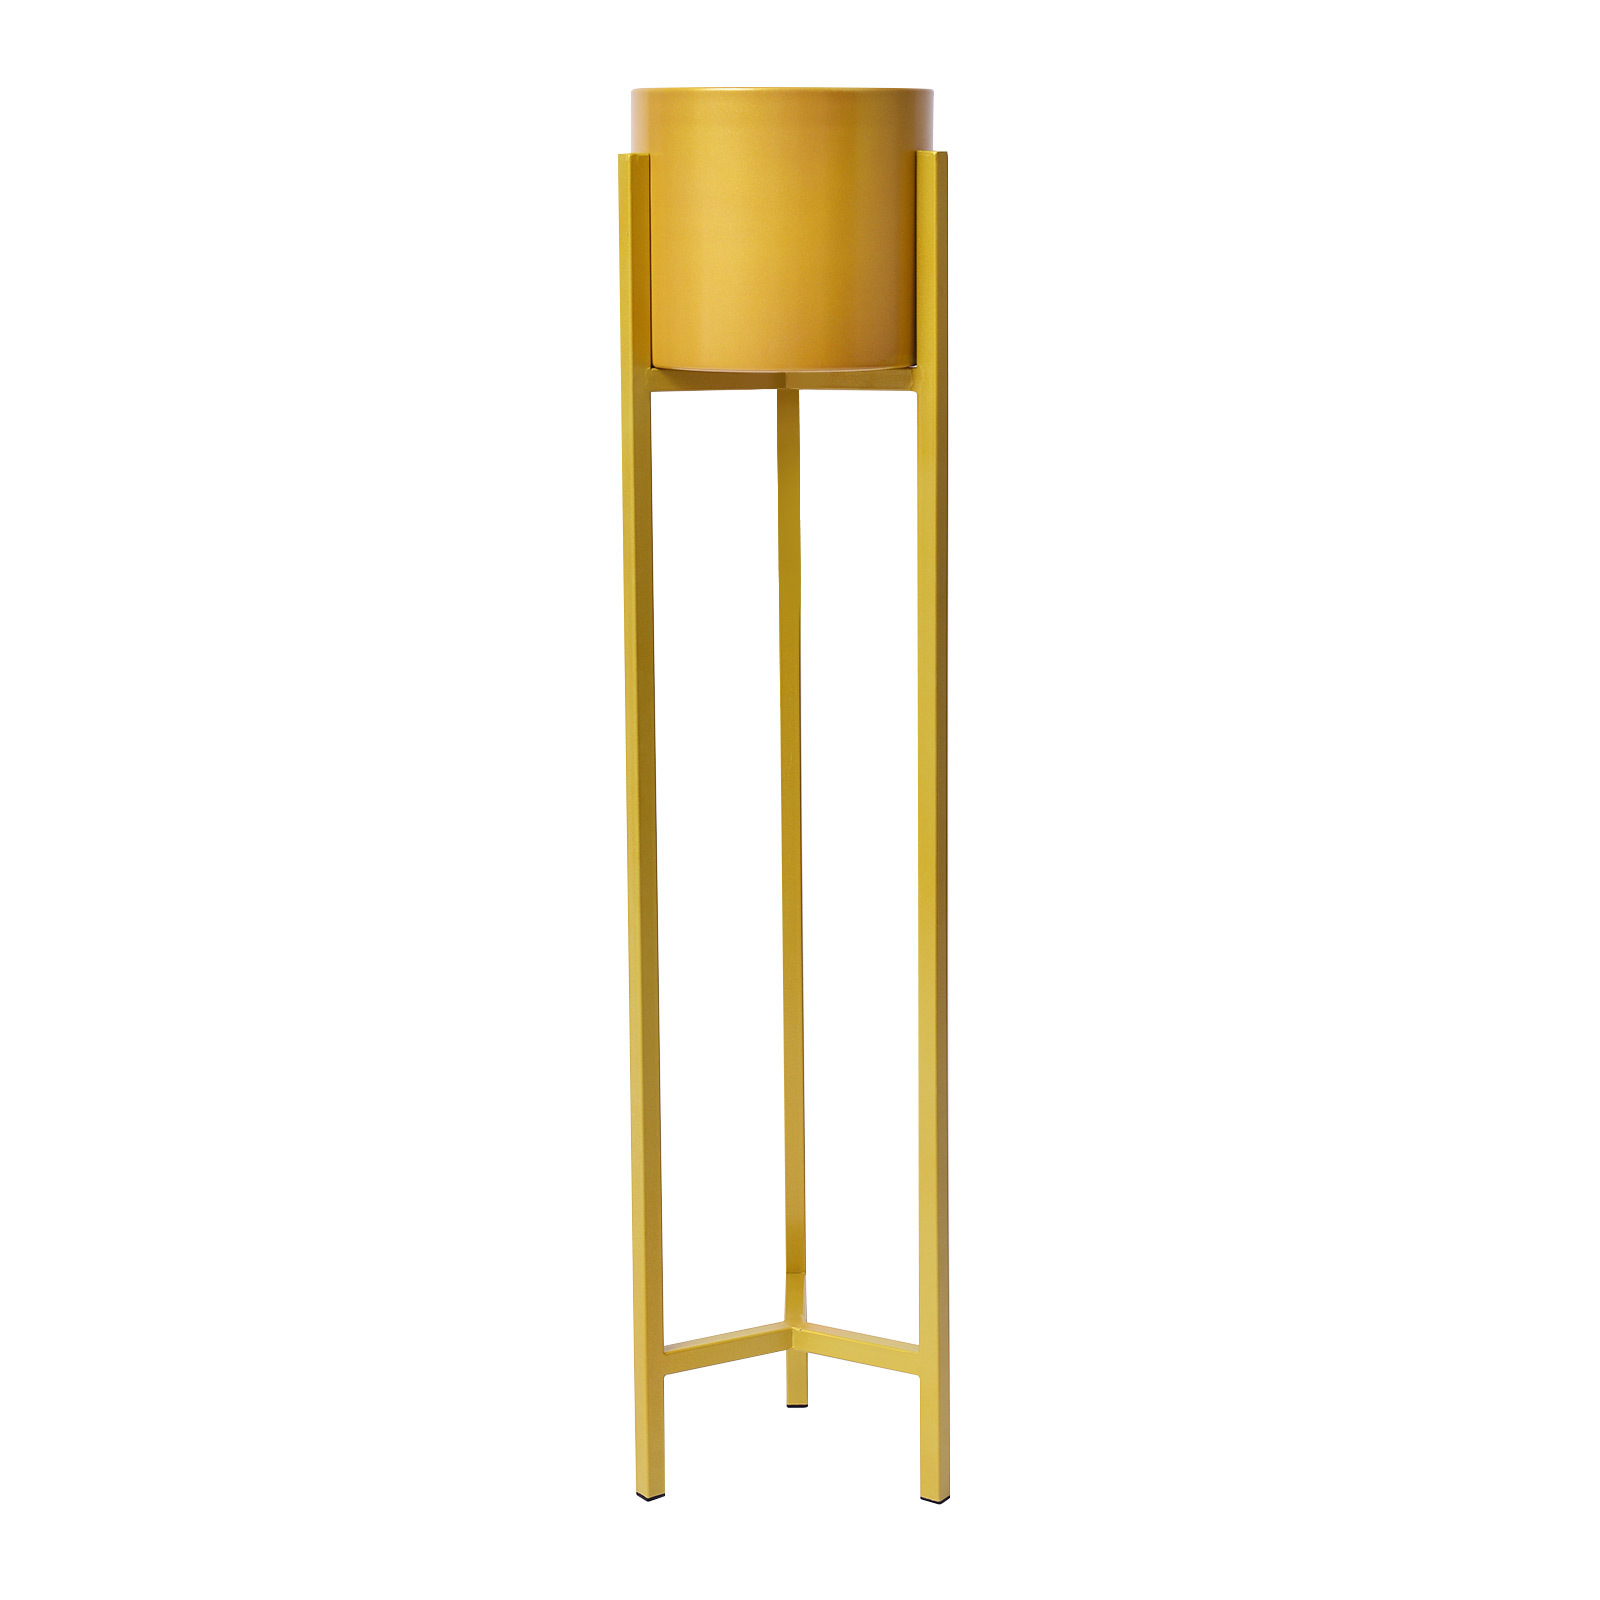 95cm Plant Stand 1 Tier - GOLD